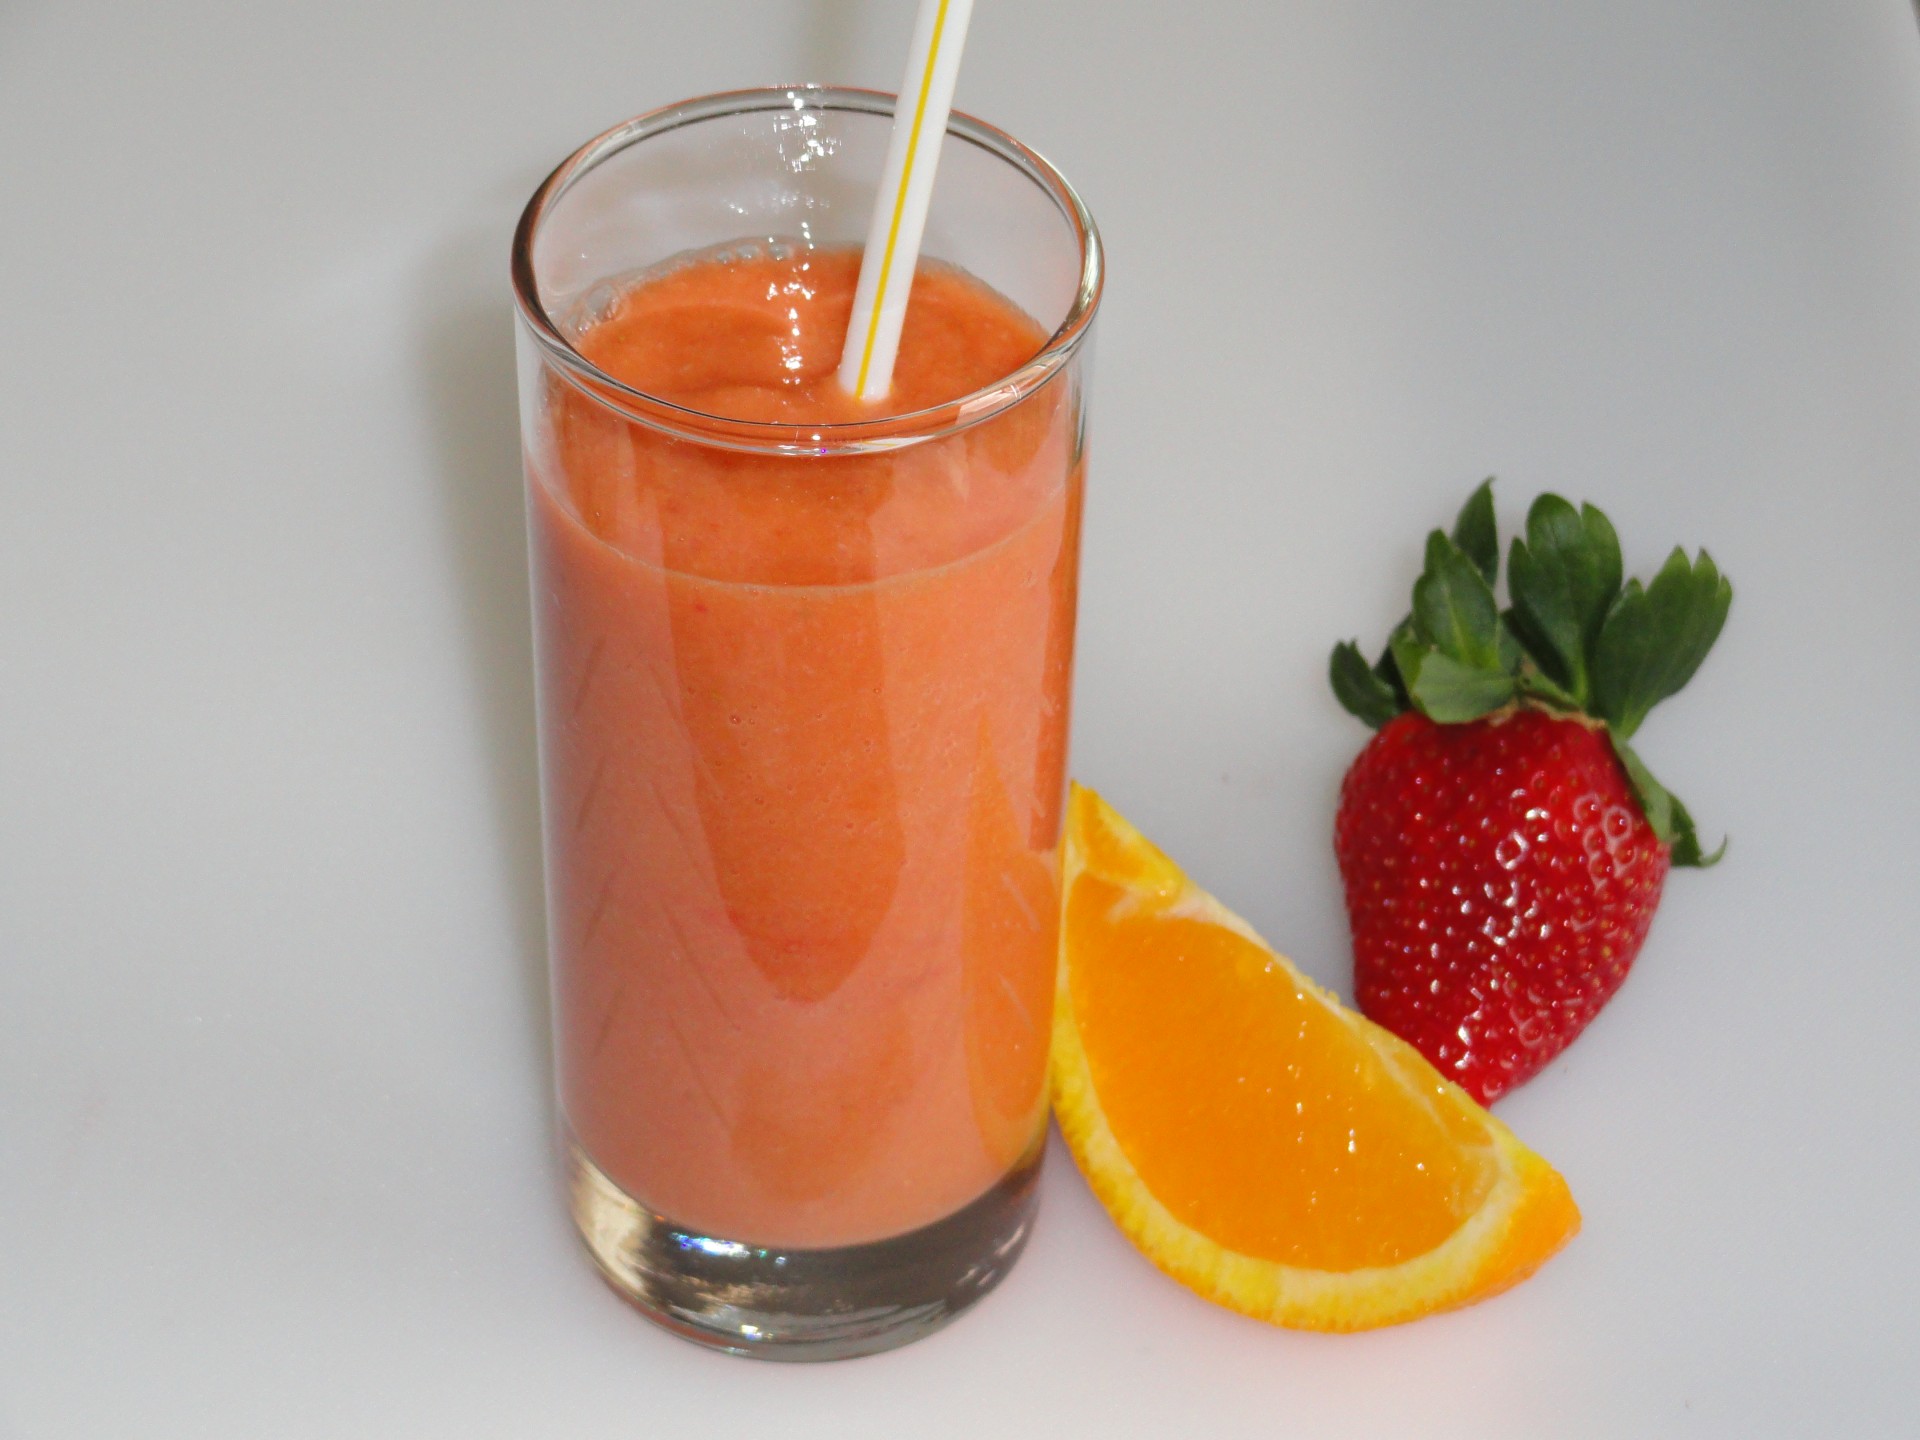 Ww 1 Point - Hair Strengthener Smoothie